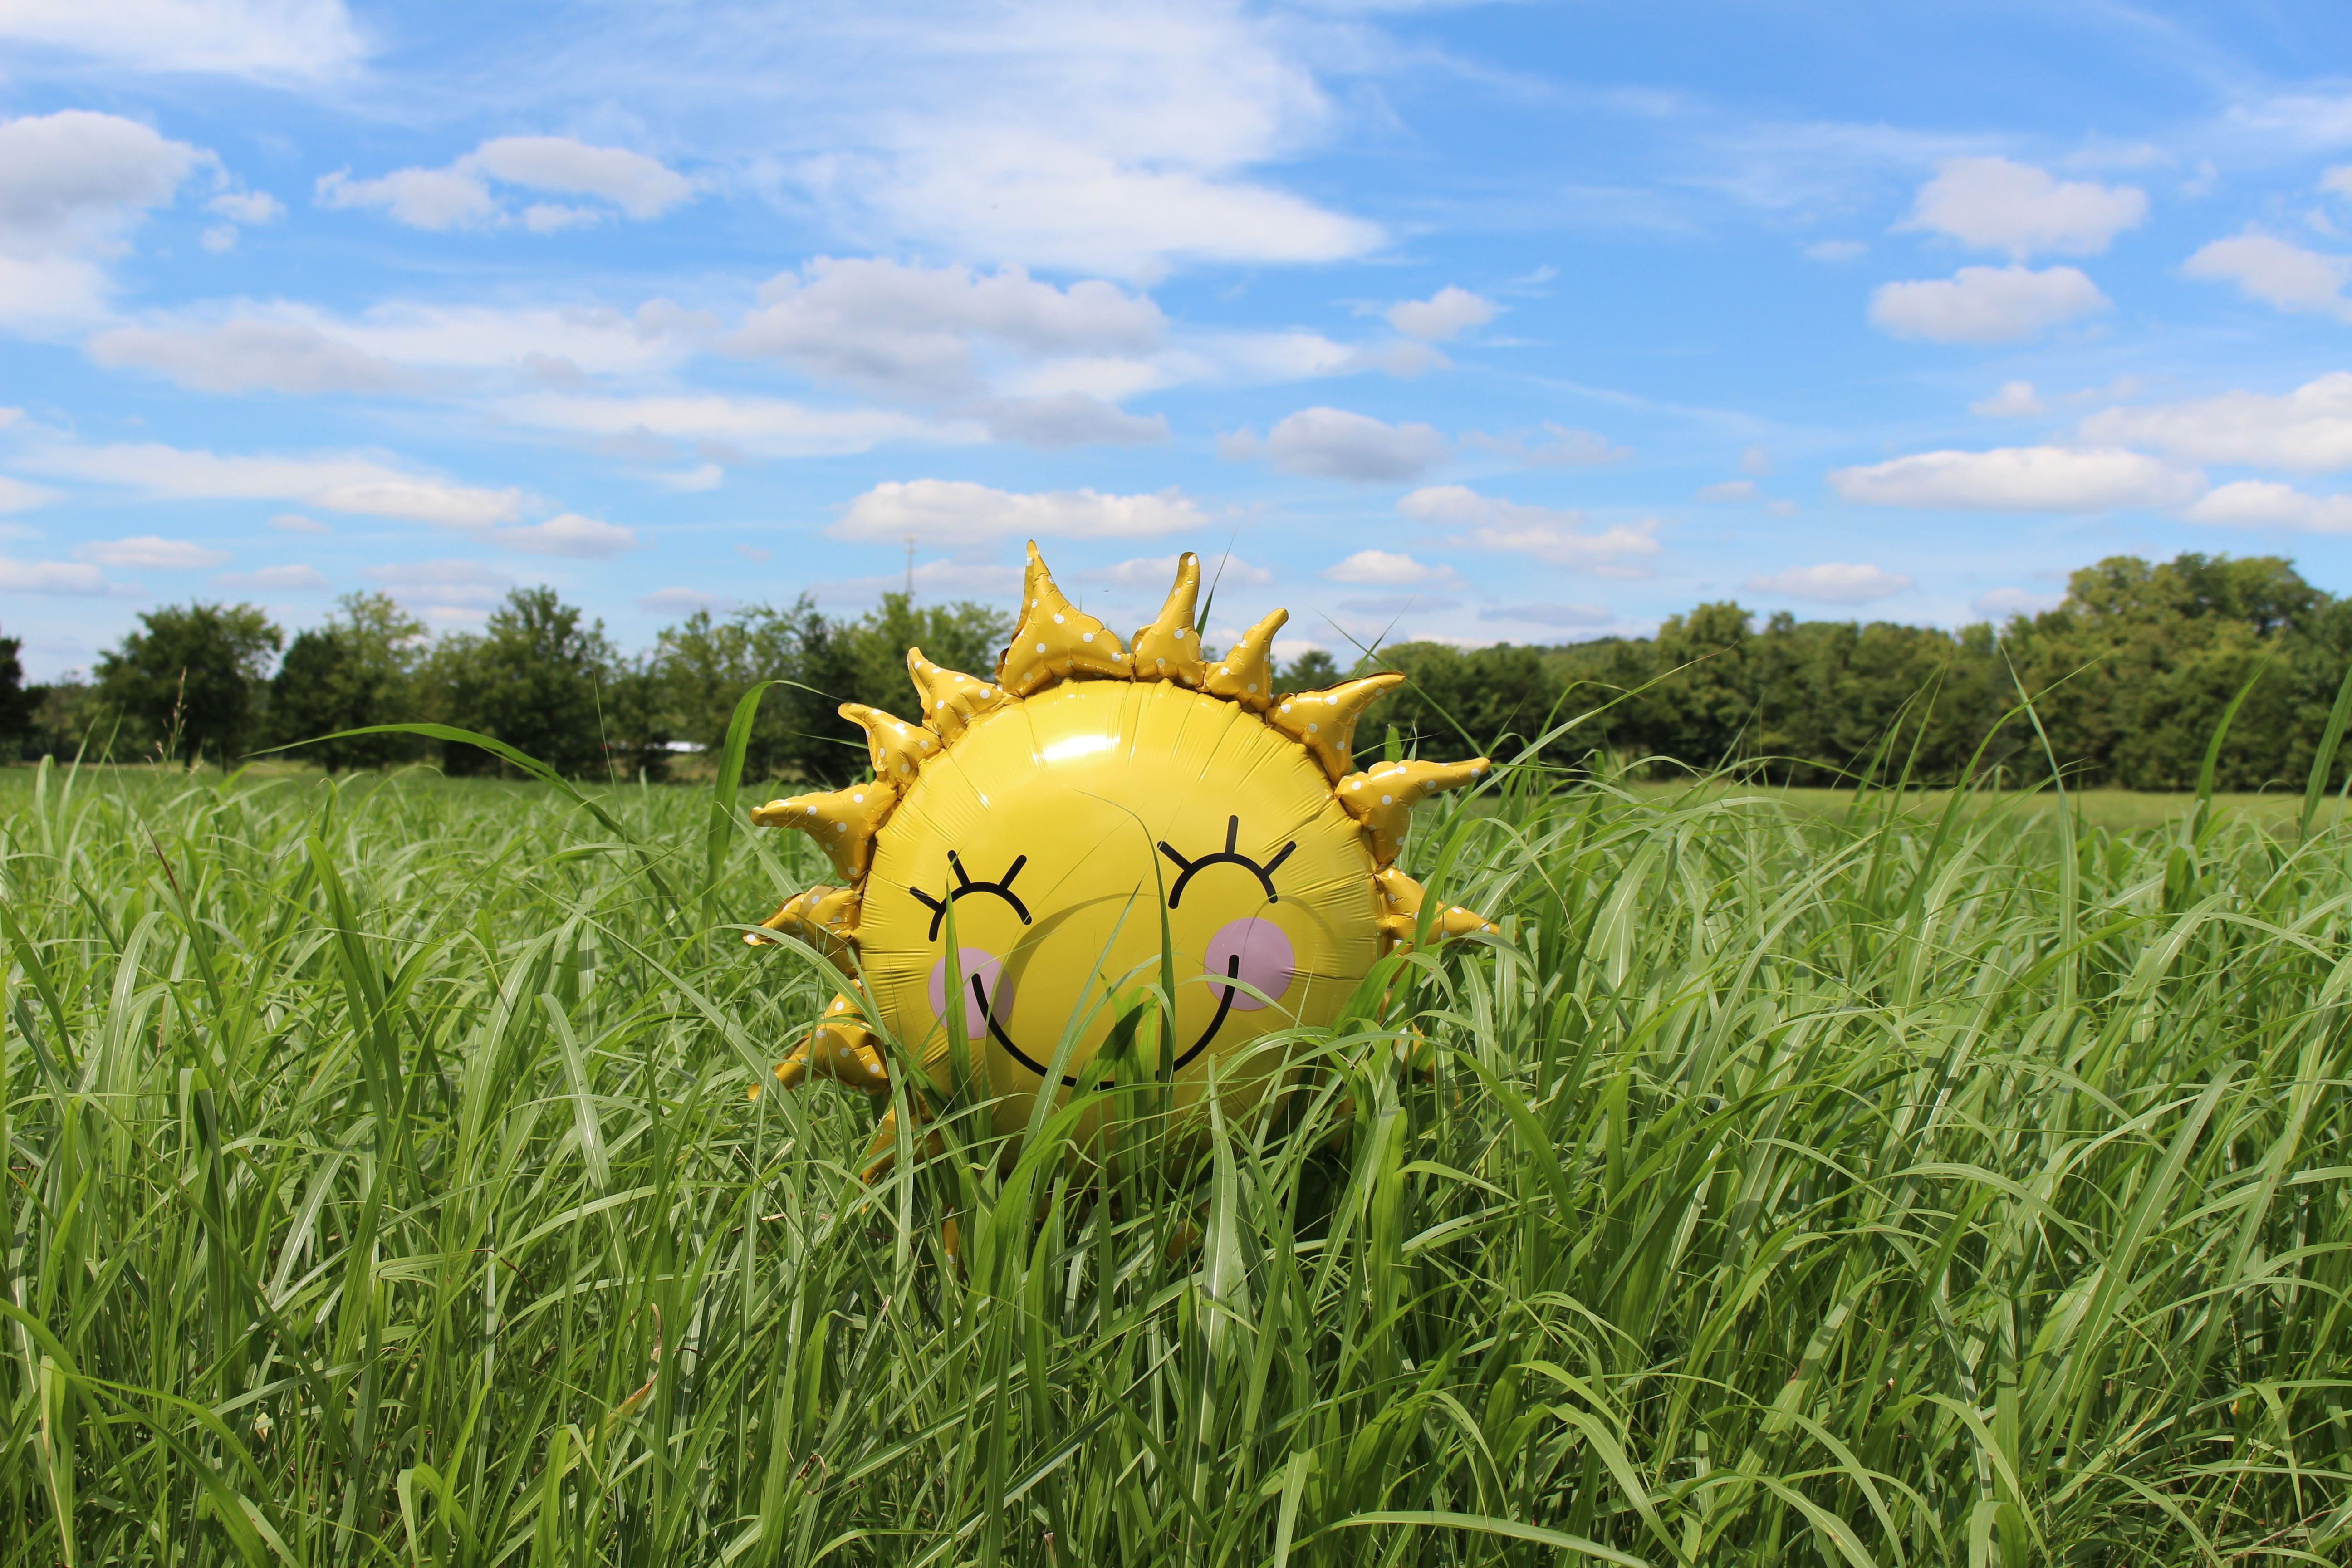 Smiling yellow sun balloon in a field of green grass